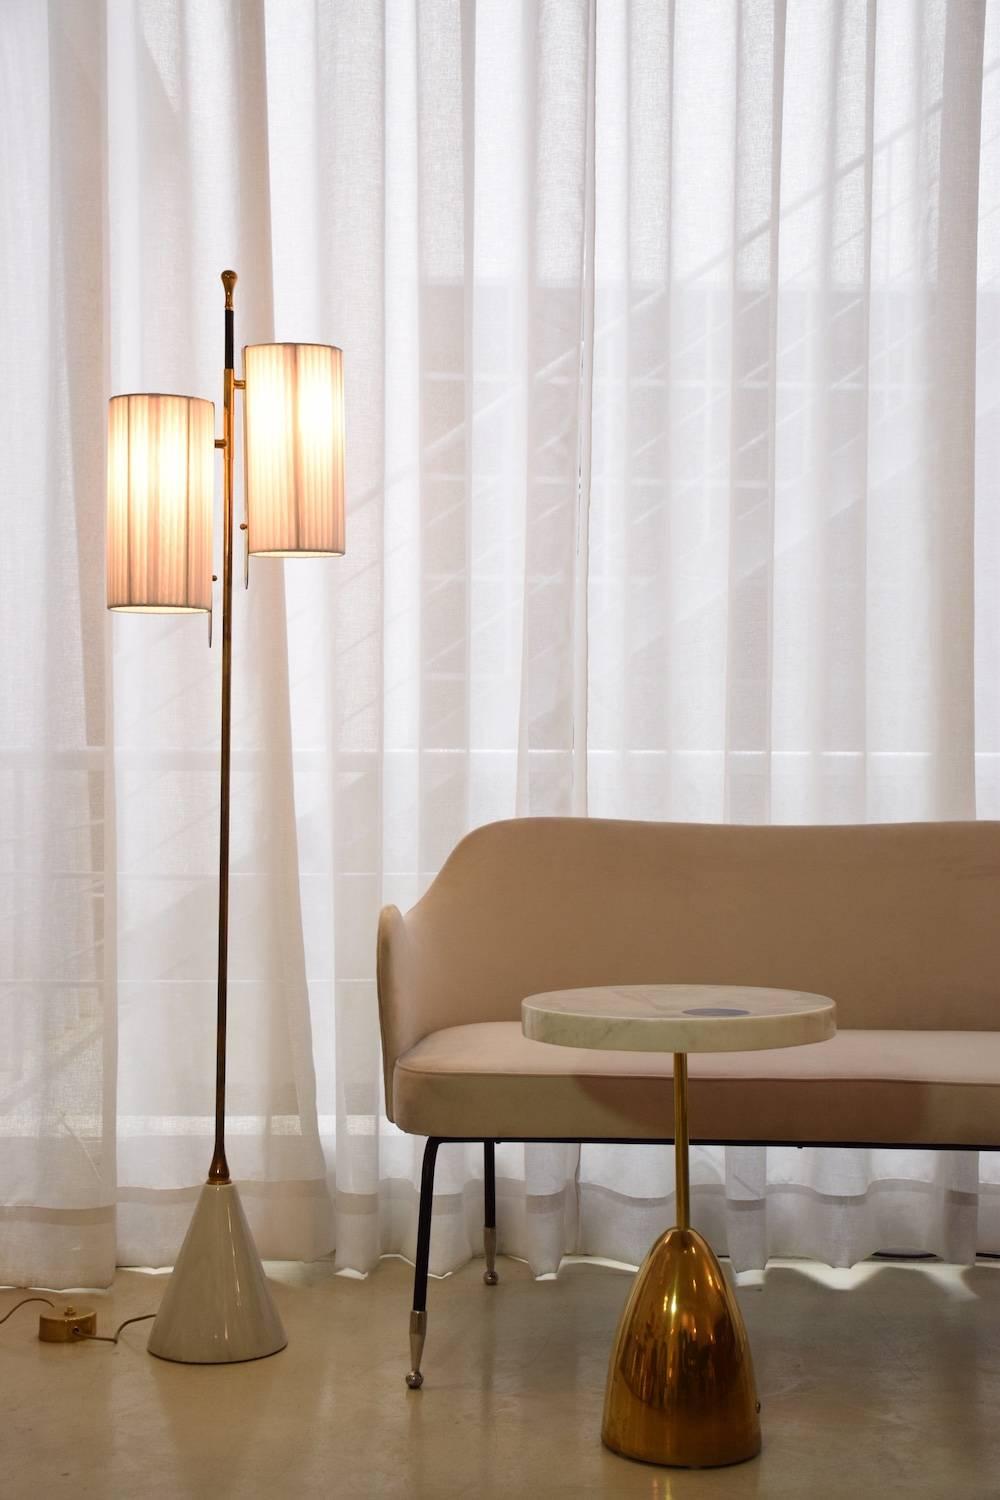 A medium-sized handcrafted floor lamp composed of a solid brass stand adorned with a leather sheathed detail at the top. The long cylinder shades are available in hand-woven wicker or fabric. Option to choose between a black, white, or green marble